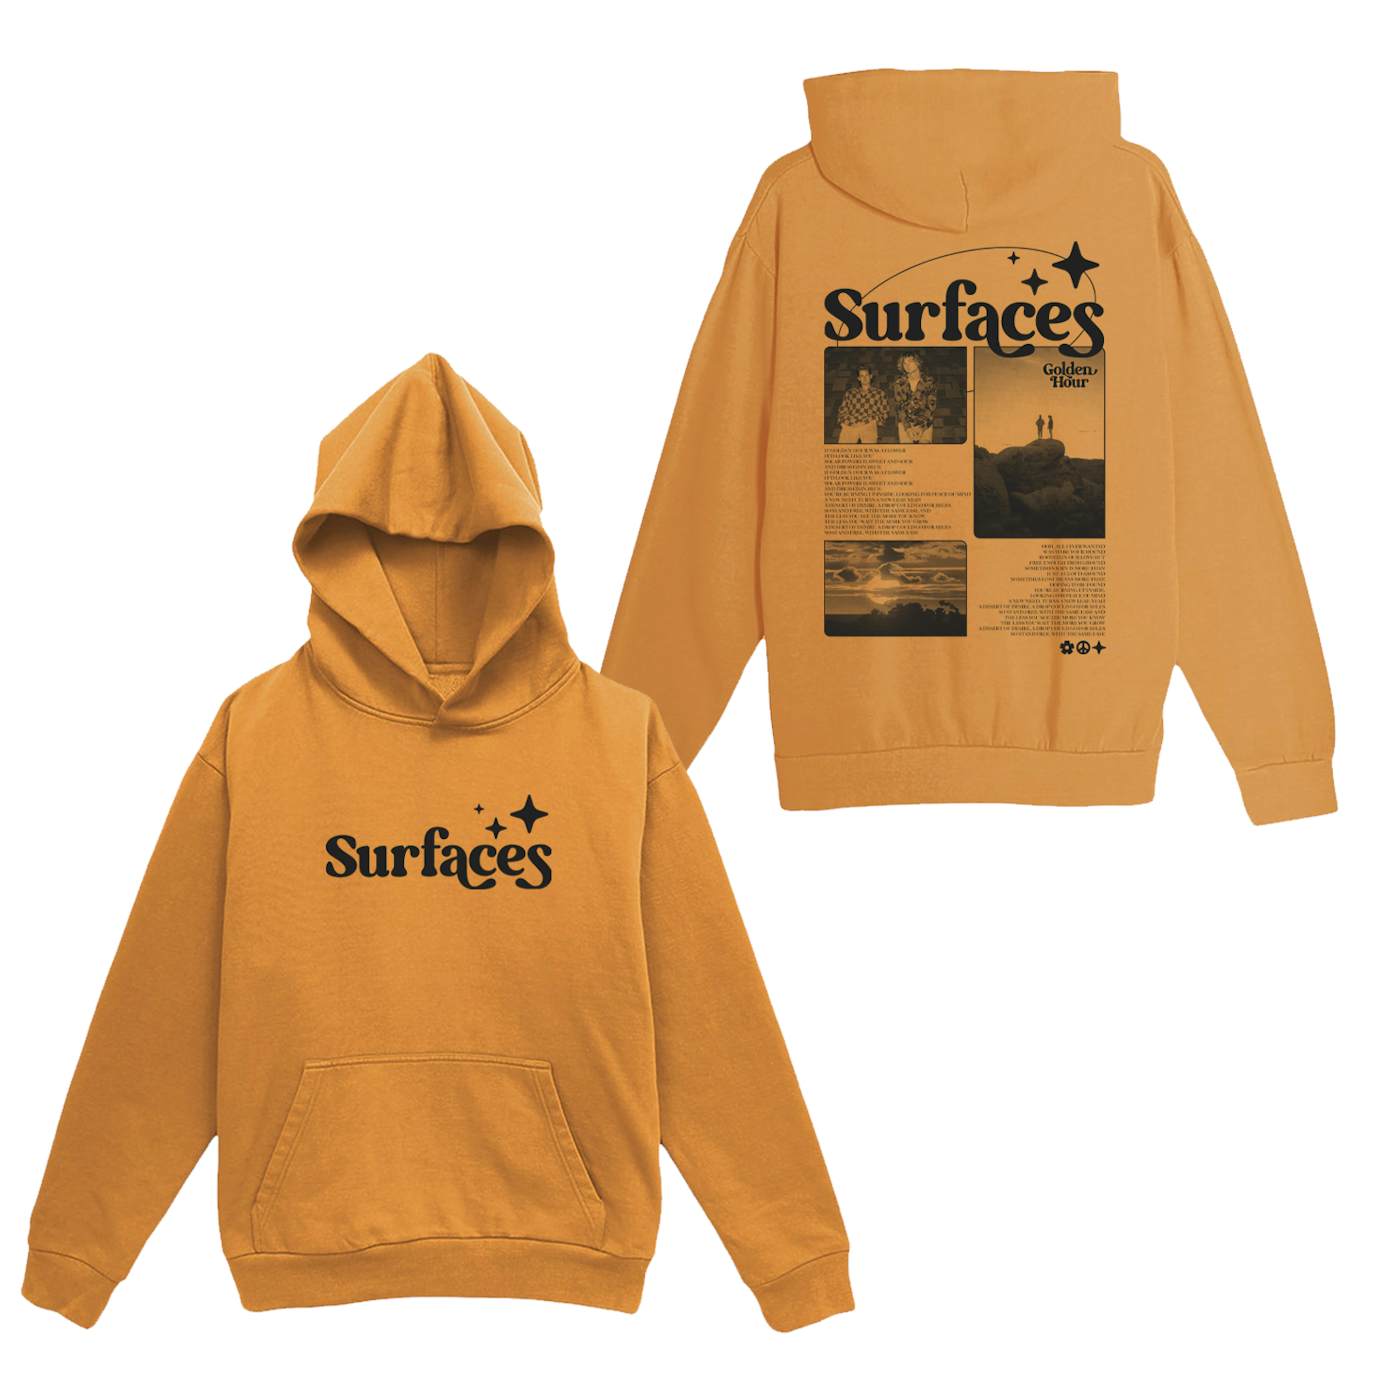 Surfaces Golden Hour Yellow Hoodie